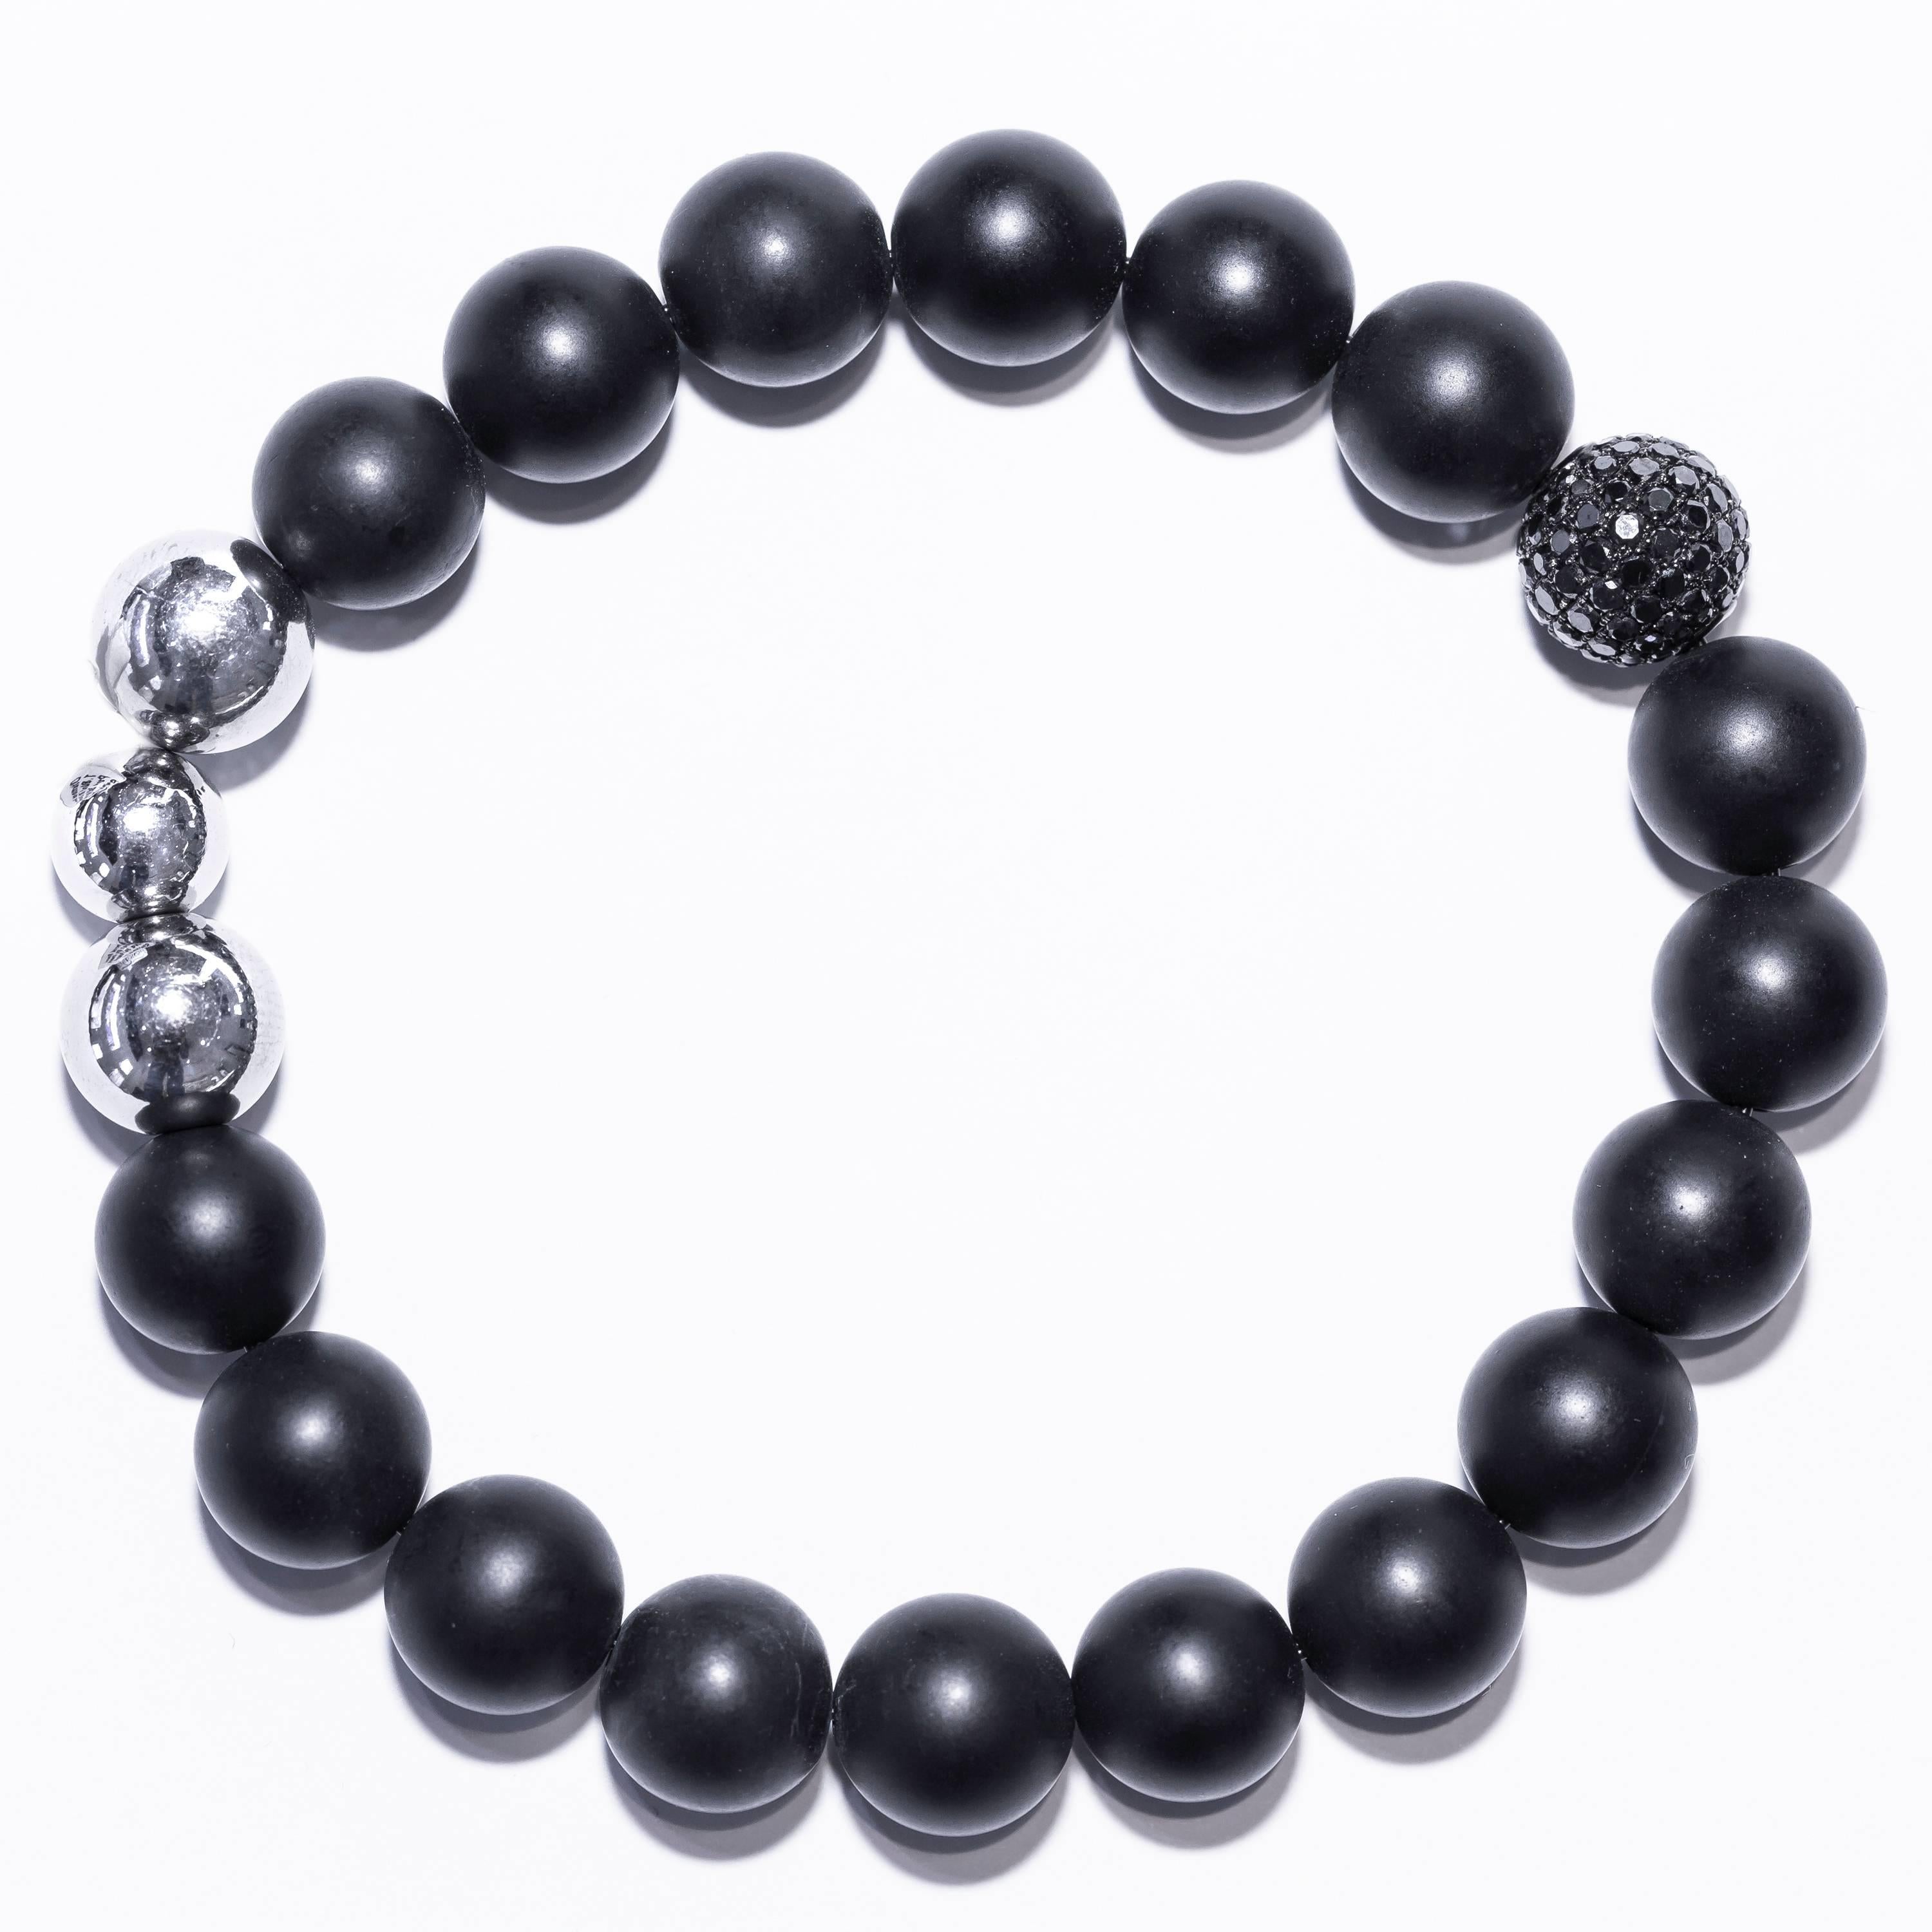 This Bracelet from features one Pave set diamond bead in 18 Karat White Gold, 3 stainless steel beads and 17 matte Black satin agate beads. Size will fit from 7.00 to 8.50 inches (17.78 cm to 21.59 cm). Contemporary and trendy bracelet suitable for